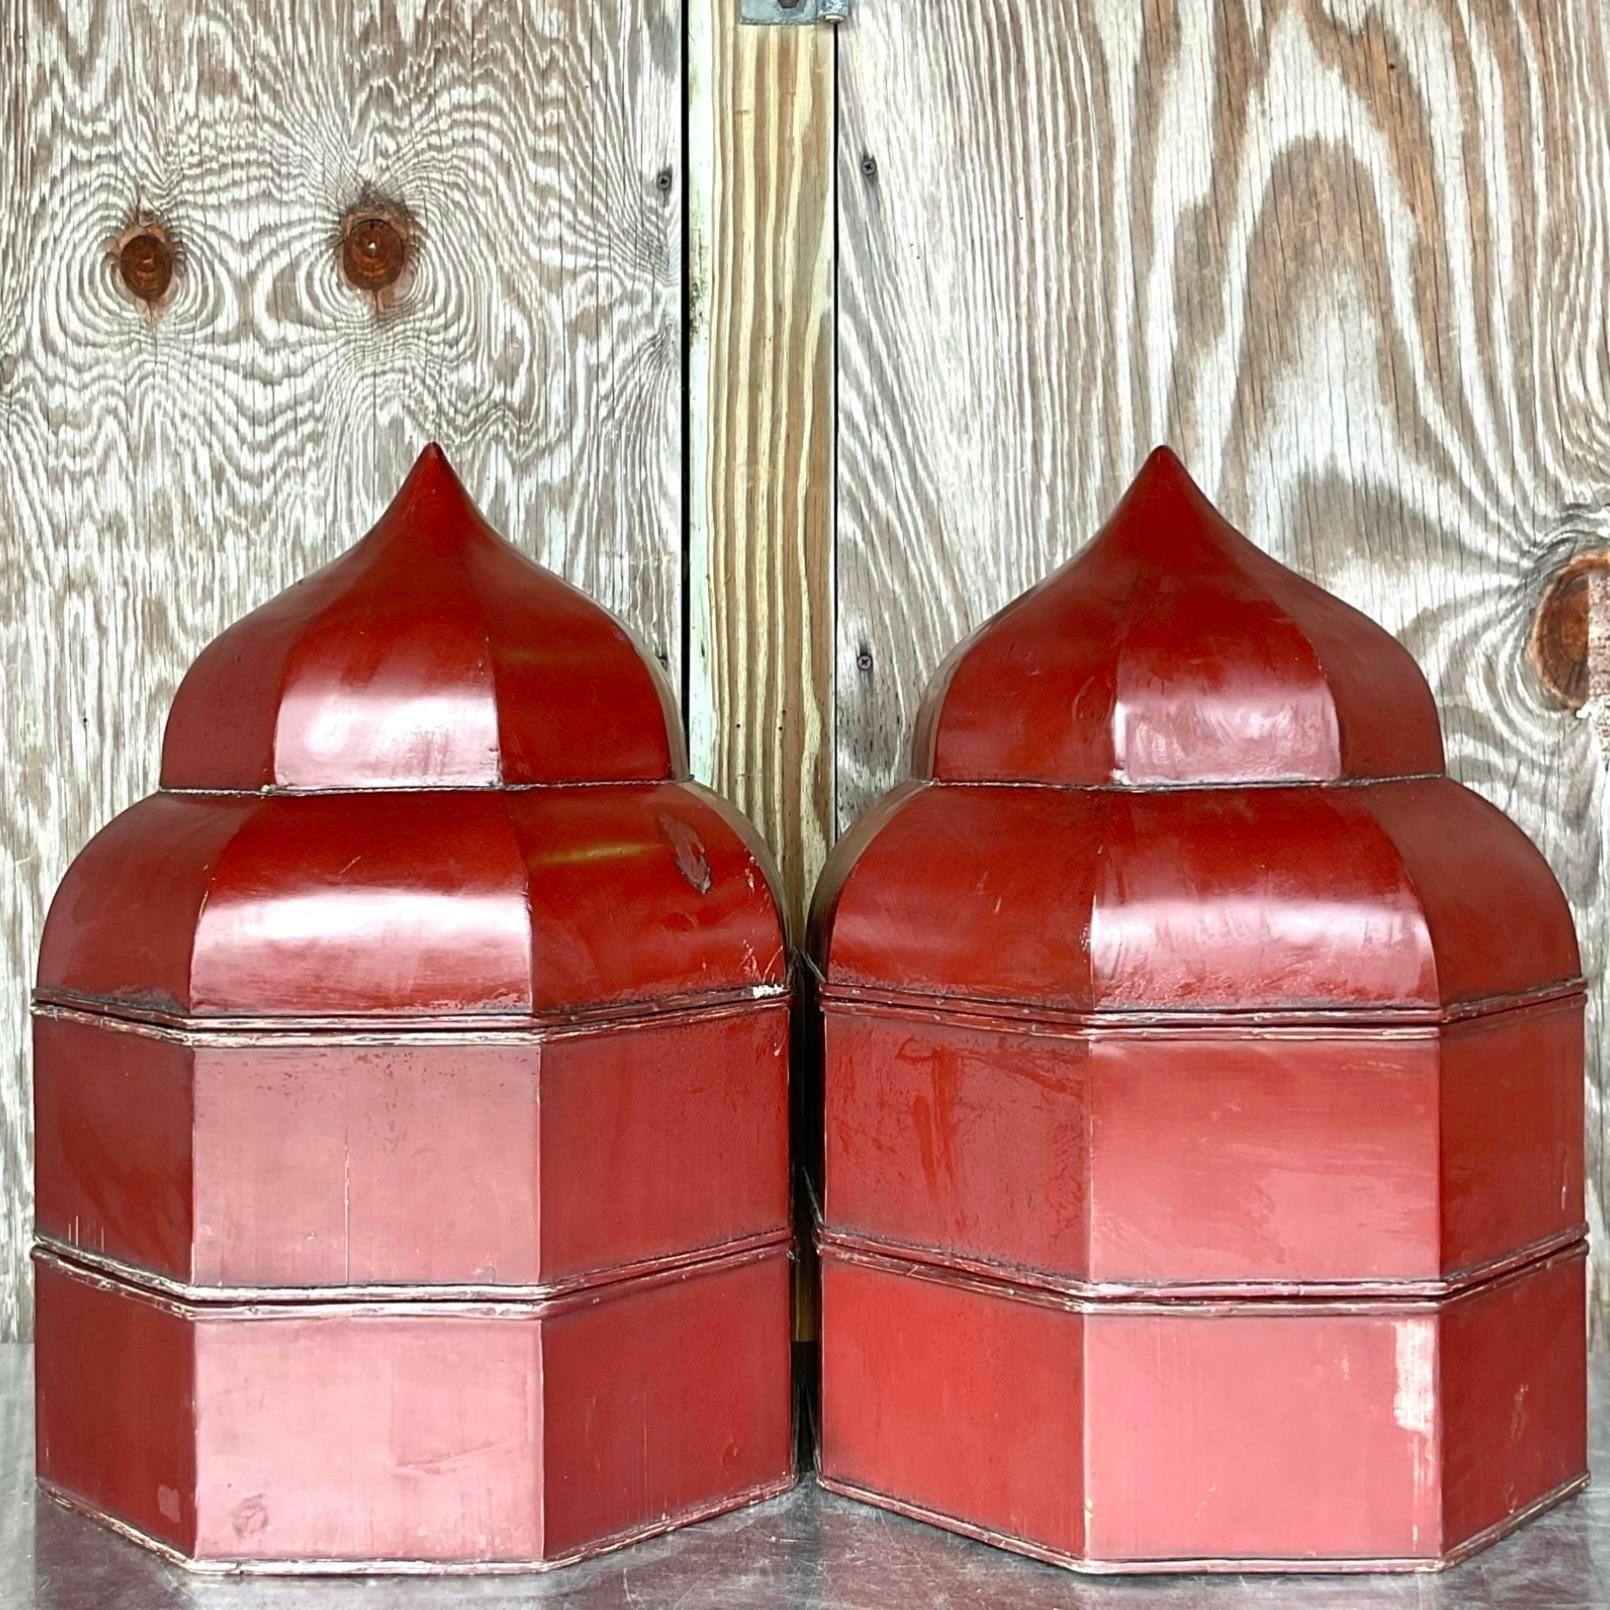 Late 20th Century Vintage Boho Lacquered Octagon Staking Temple Boxes - a Pair For Sale 4